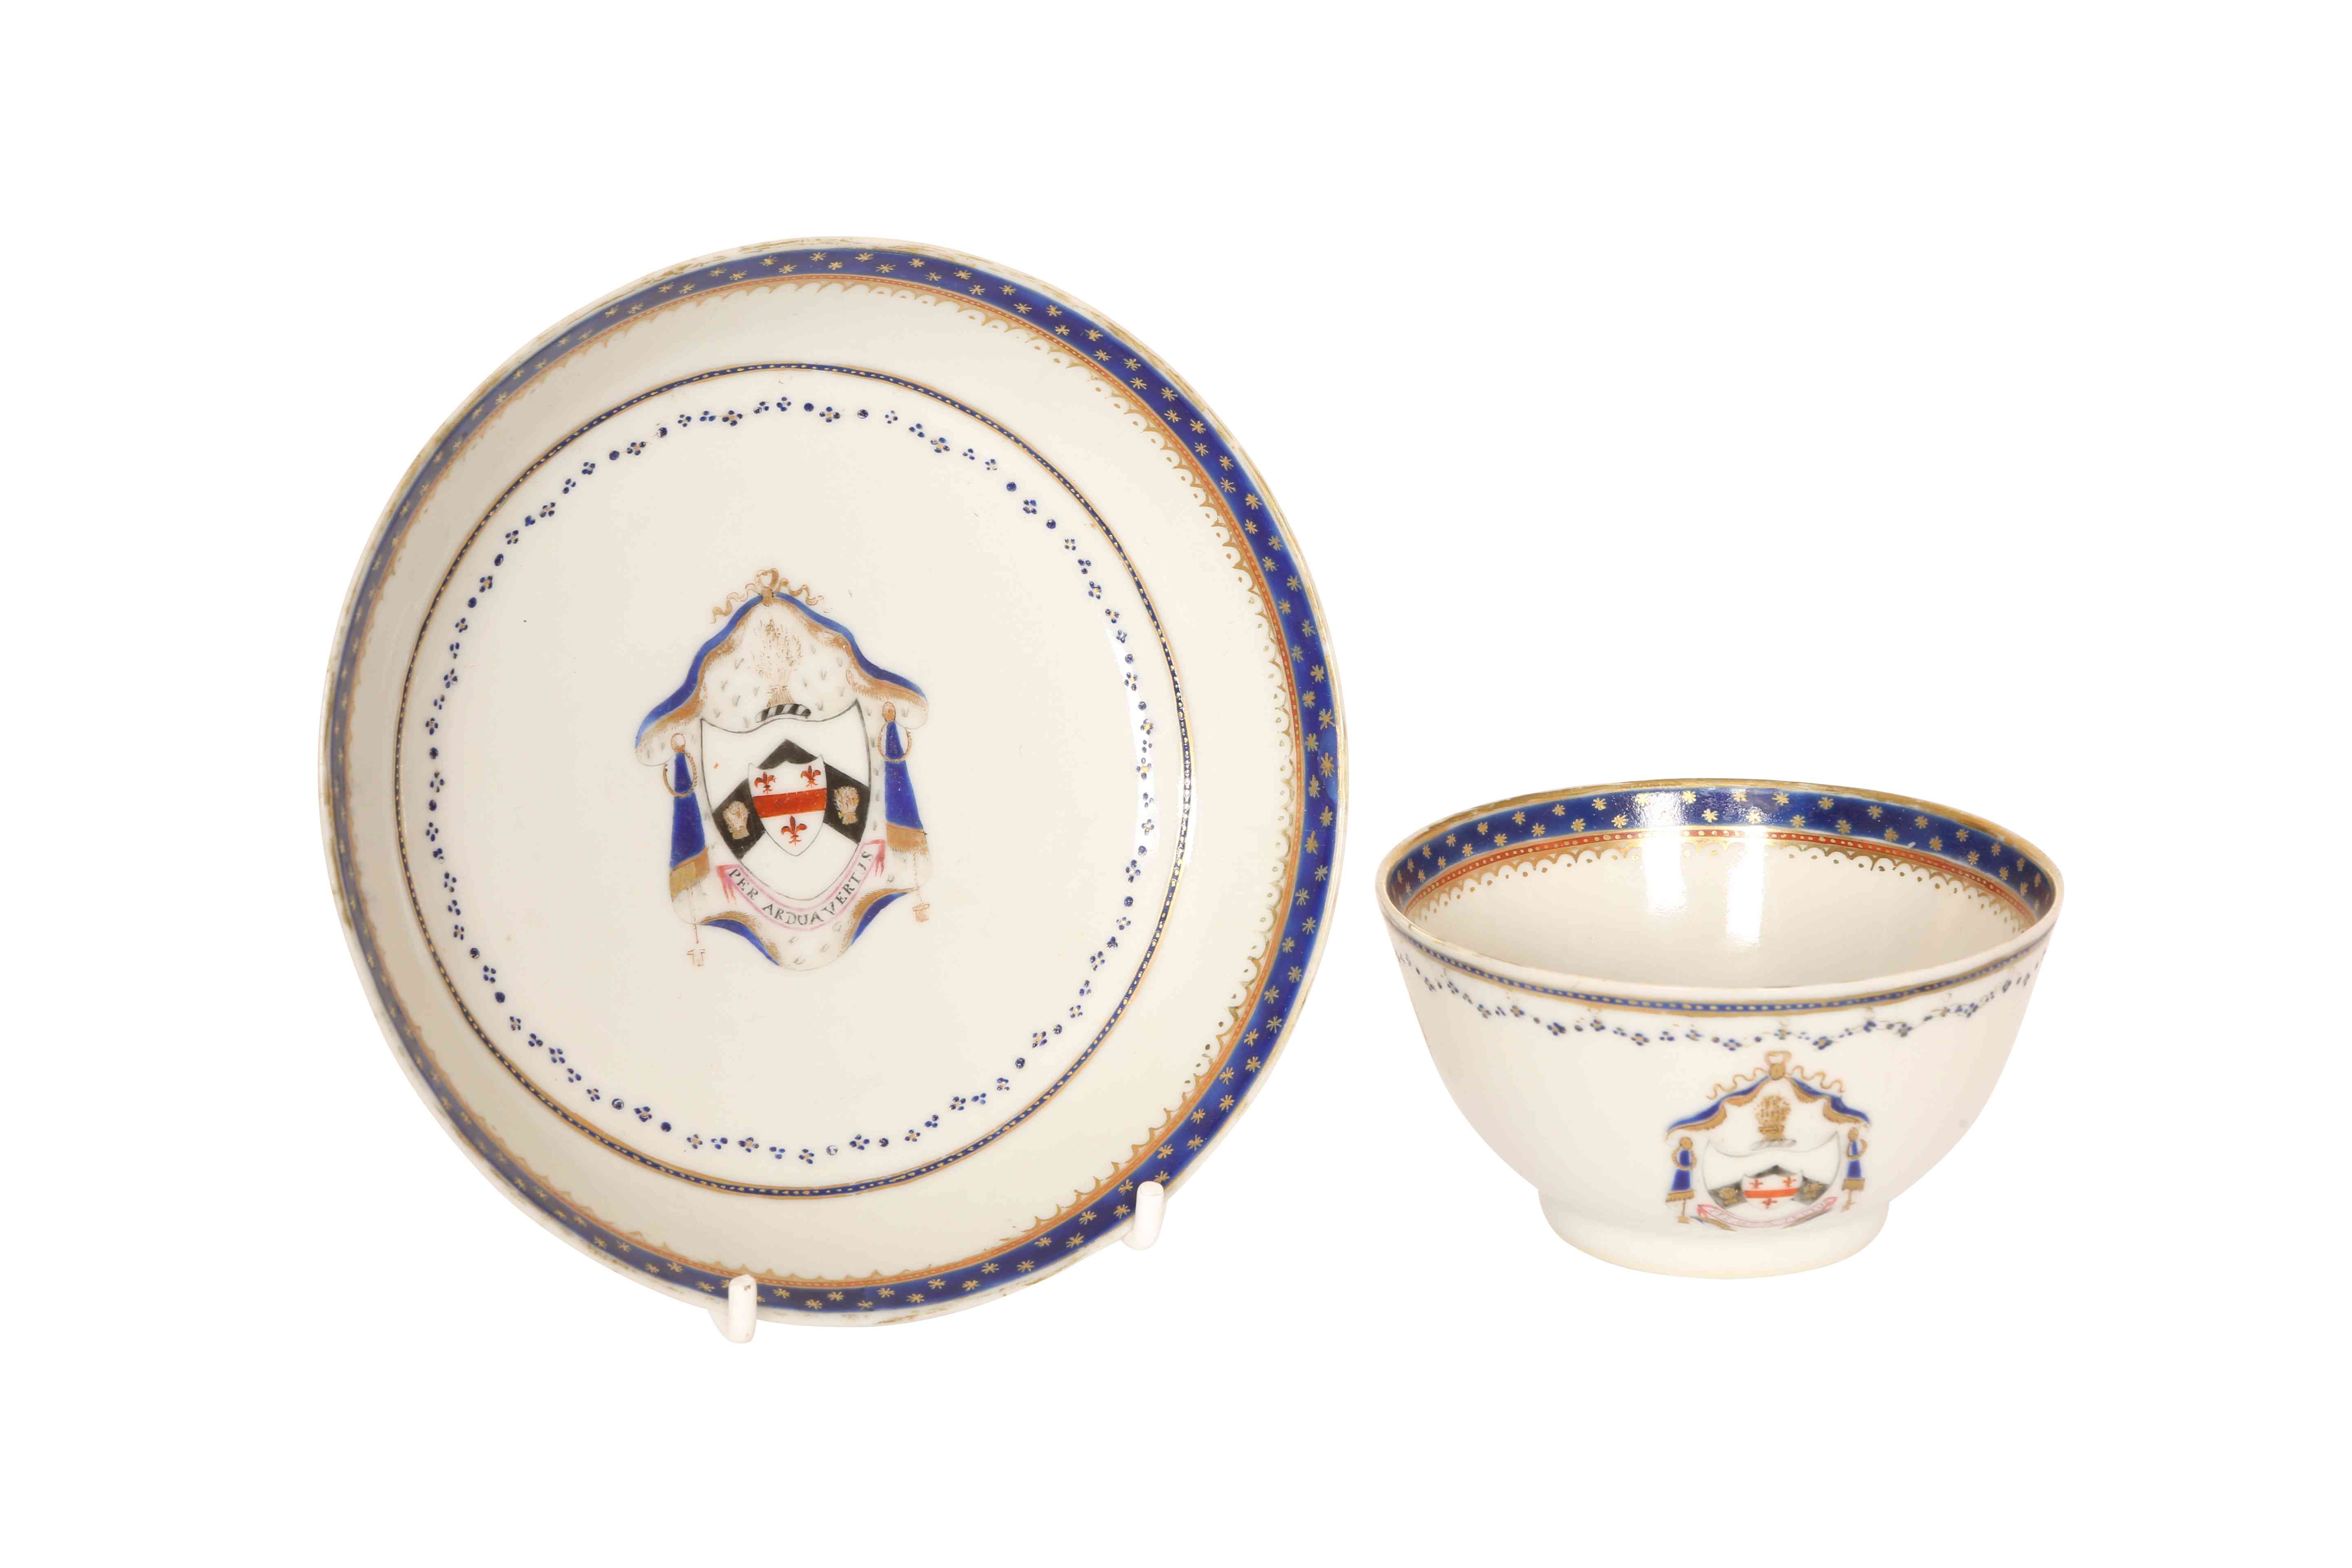 A CHINESE ARMORIAL PORCELAIN TEA BOWL AND SAUCER, QIANLONG PERIOD,